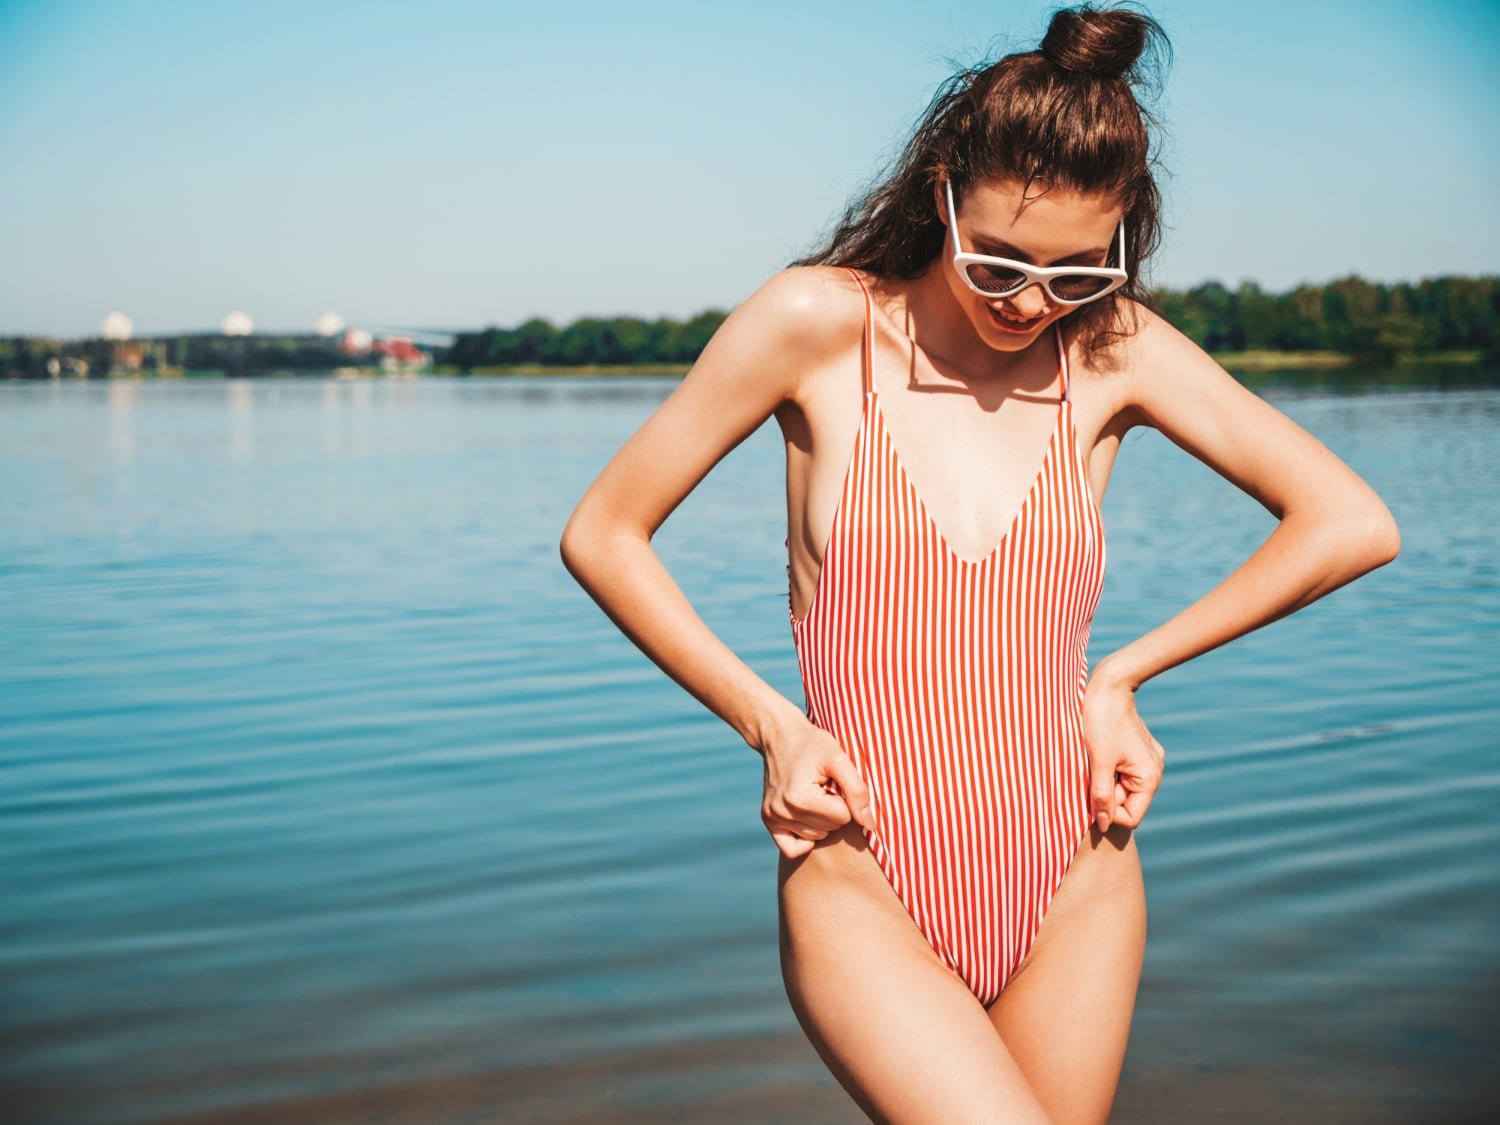 Dress In Style With Solid & Striped’s Designer Swimwear